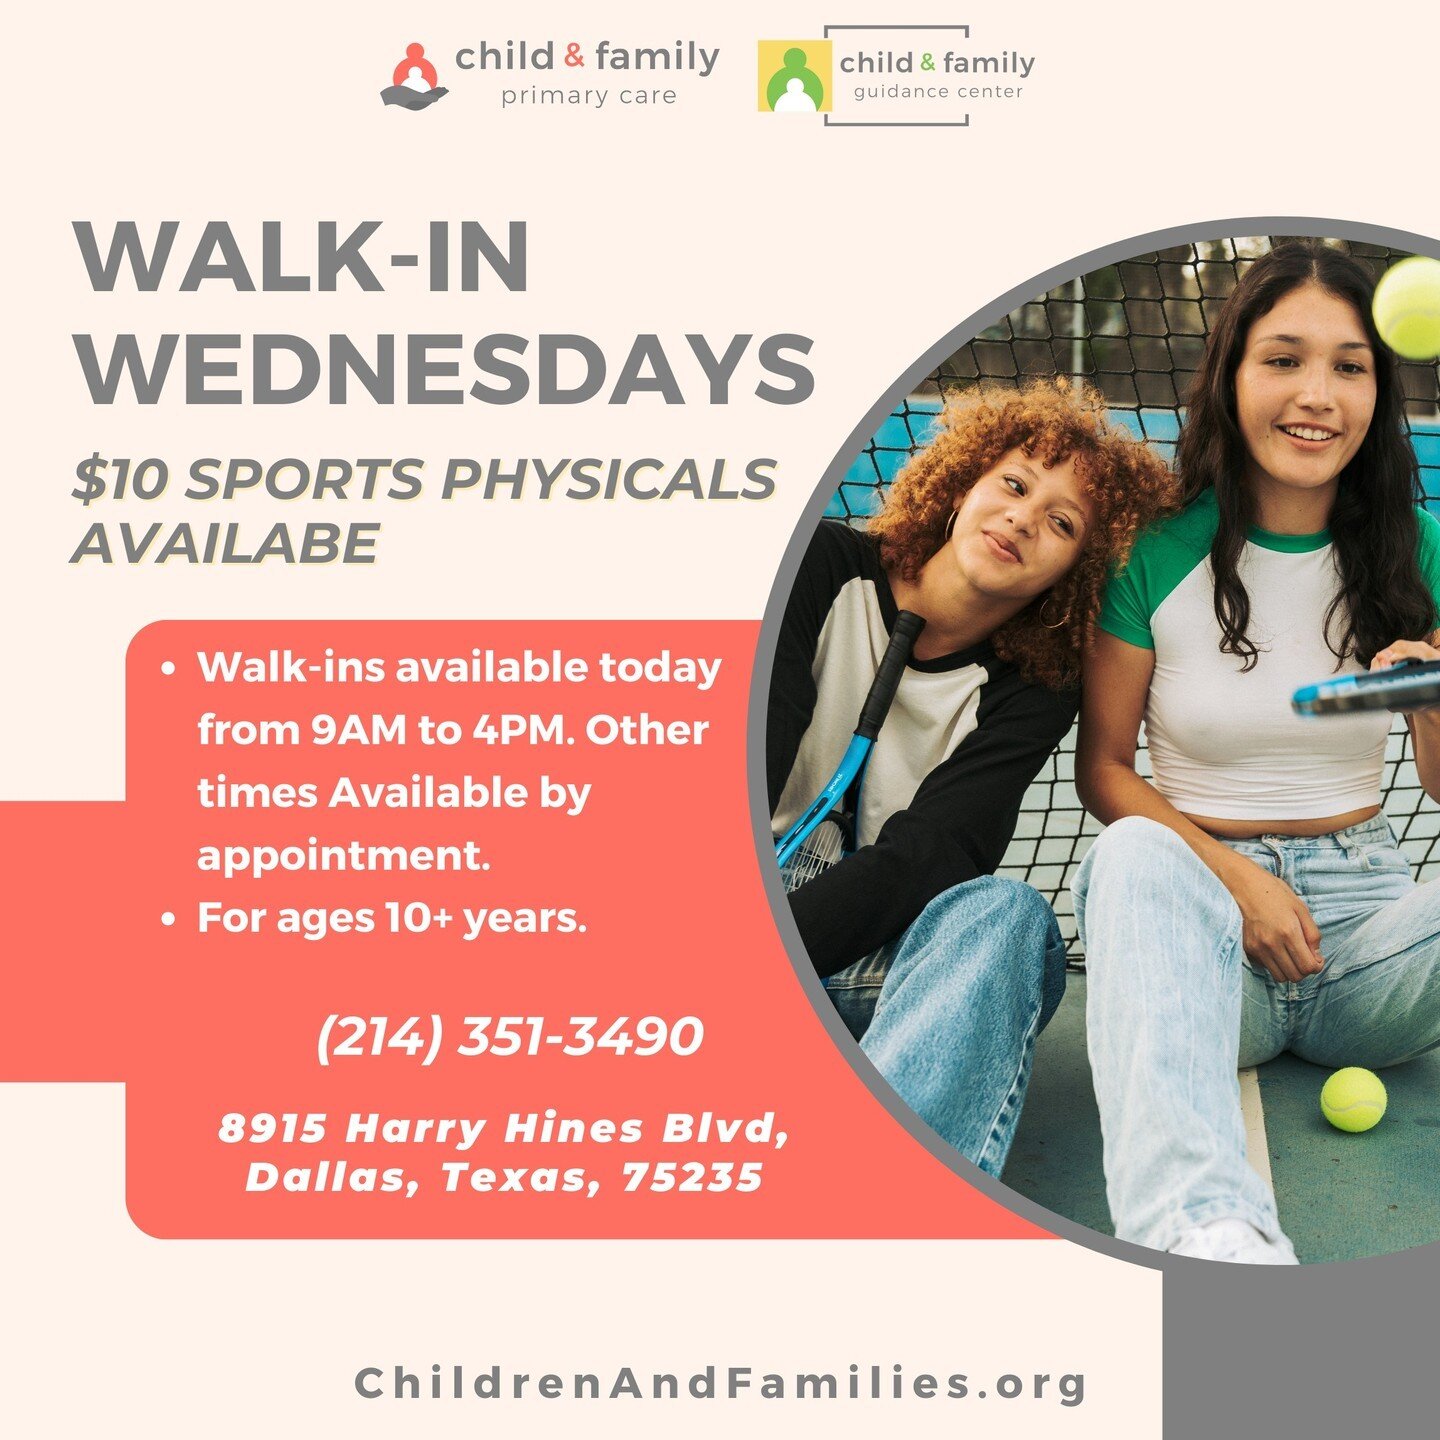 Every Wednesday, walk-ins are available from 9AM - 4PM for our $10 sports physicals! Other times are also available by appointment. If you have any questions, please message us or give us a call at 214.351.3490.

#DallasMentalHealth #TexasMentalHealt